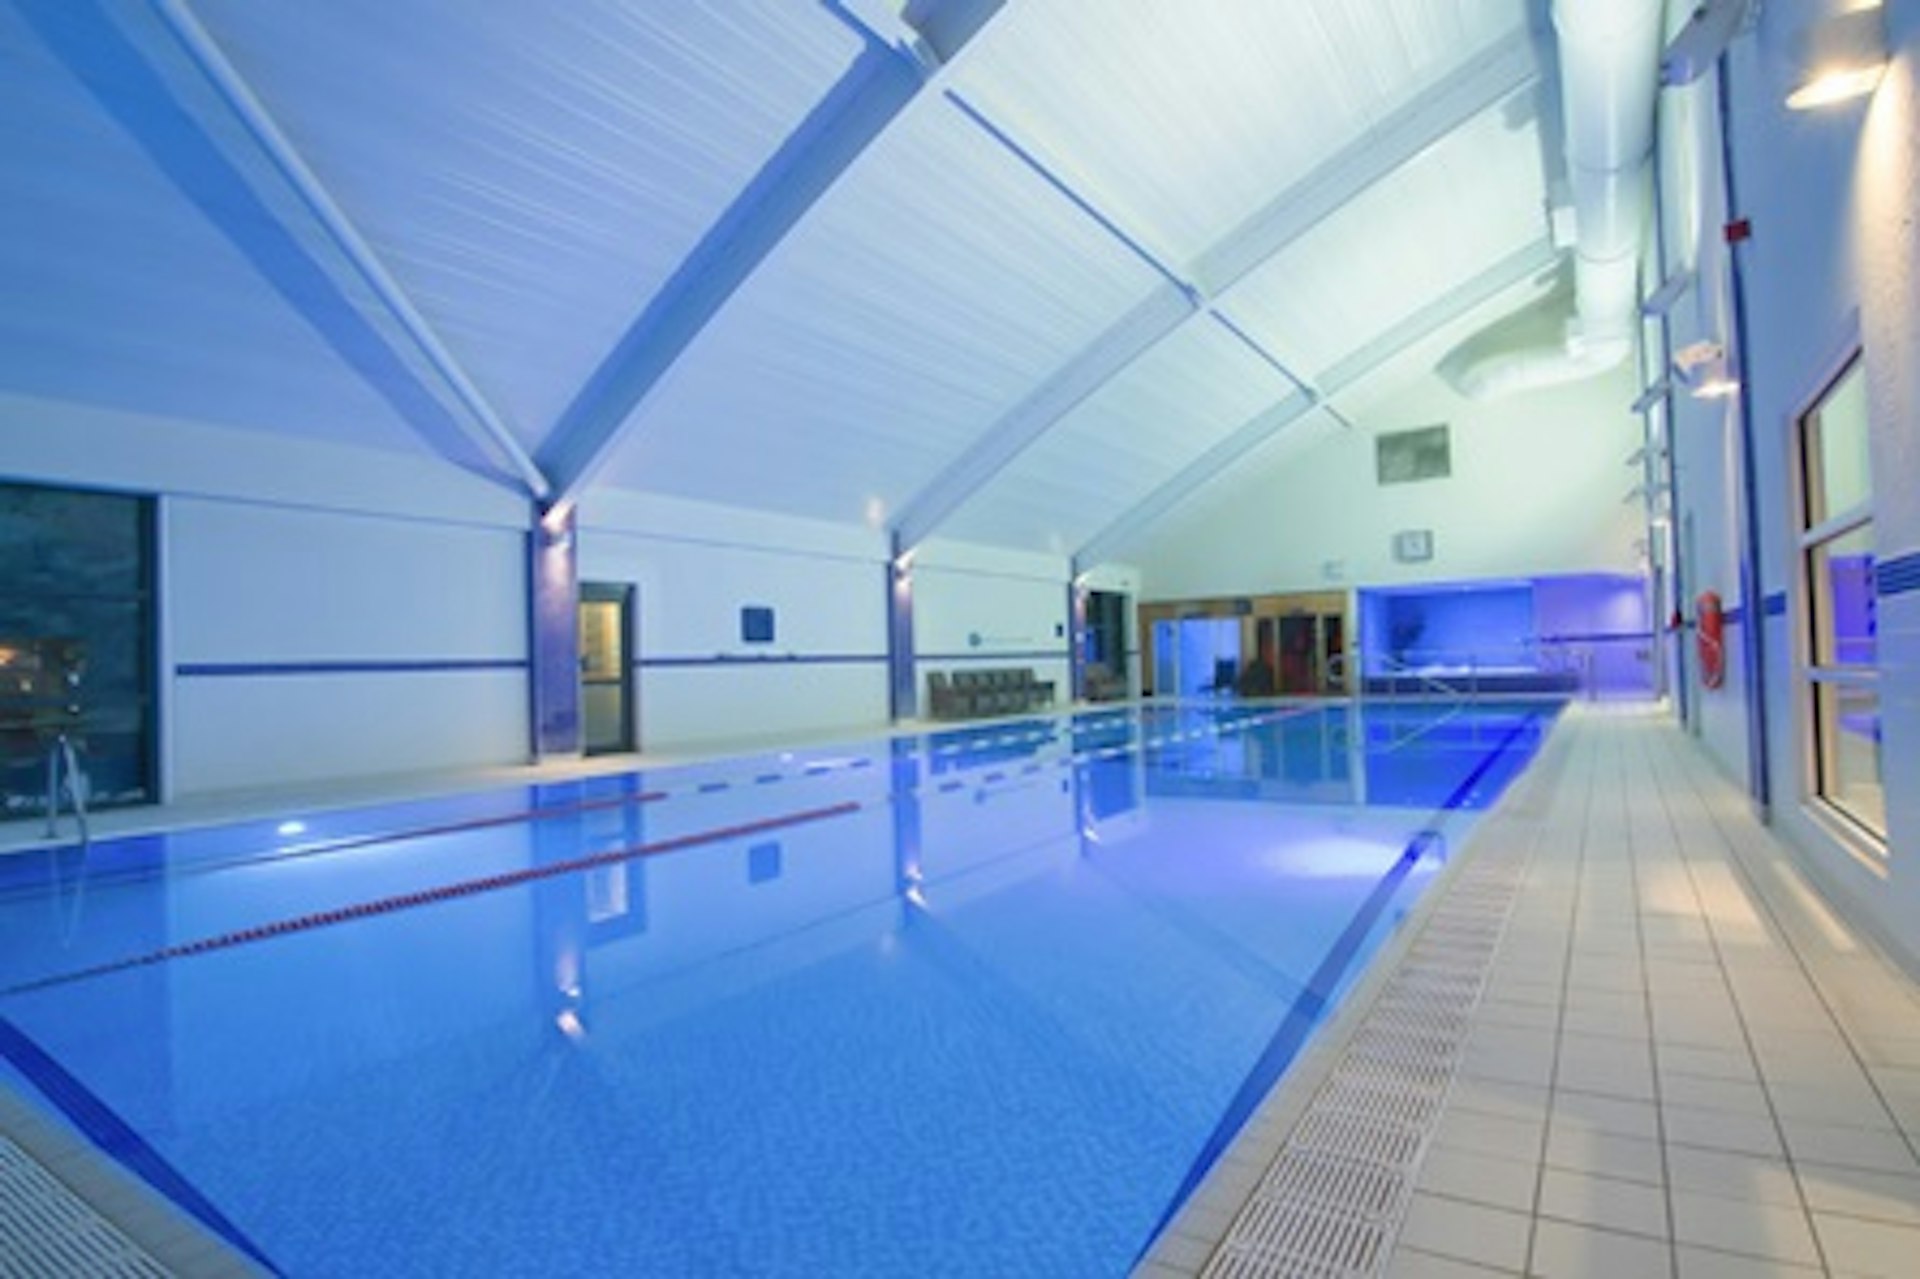 Two Night Revitalising Spa Break with Dinner and Treatments for Two at Bannatyne Hastings Hotel 4